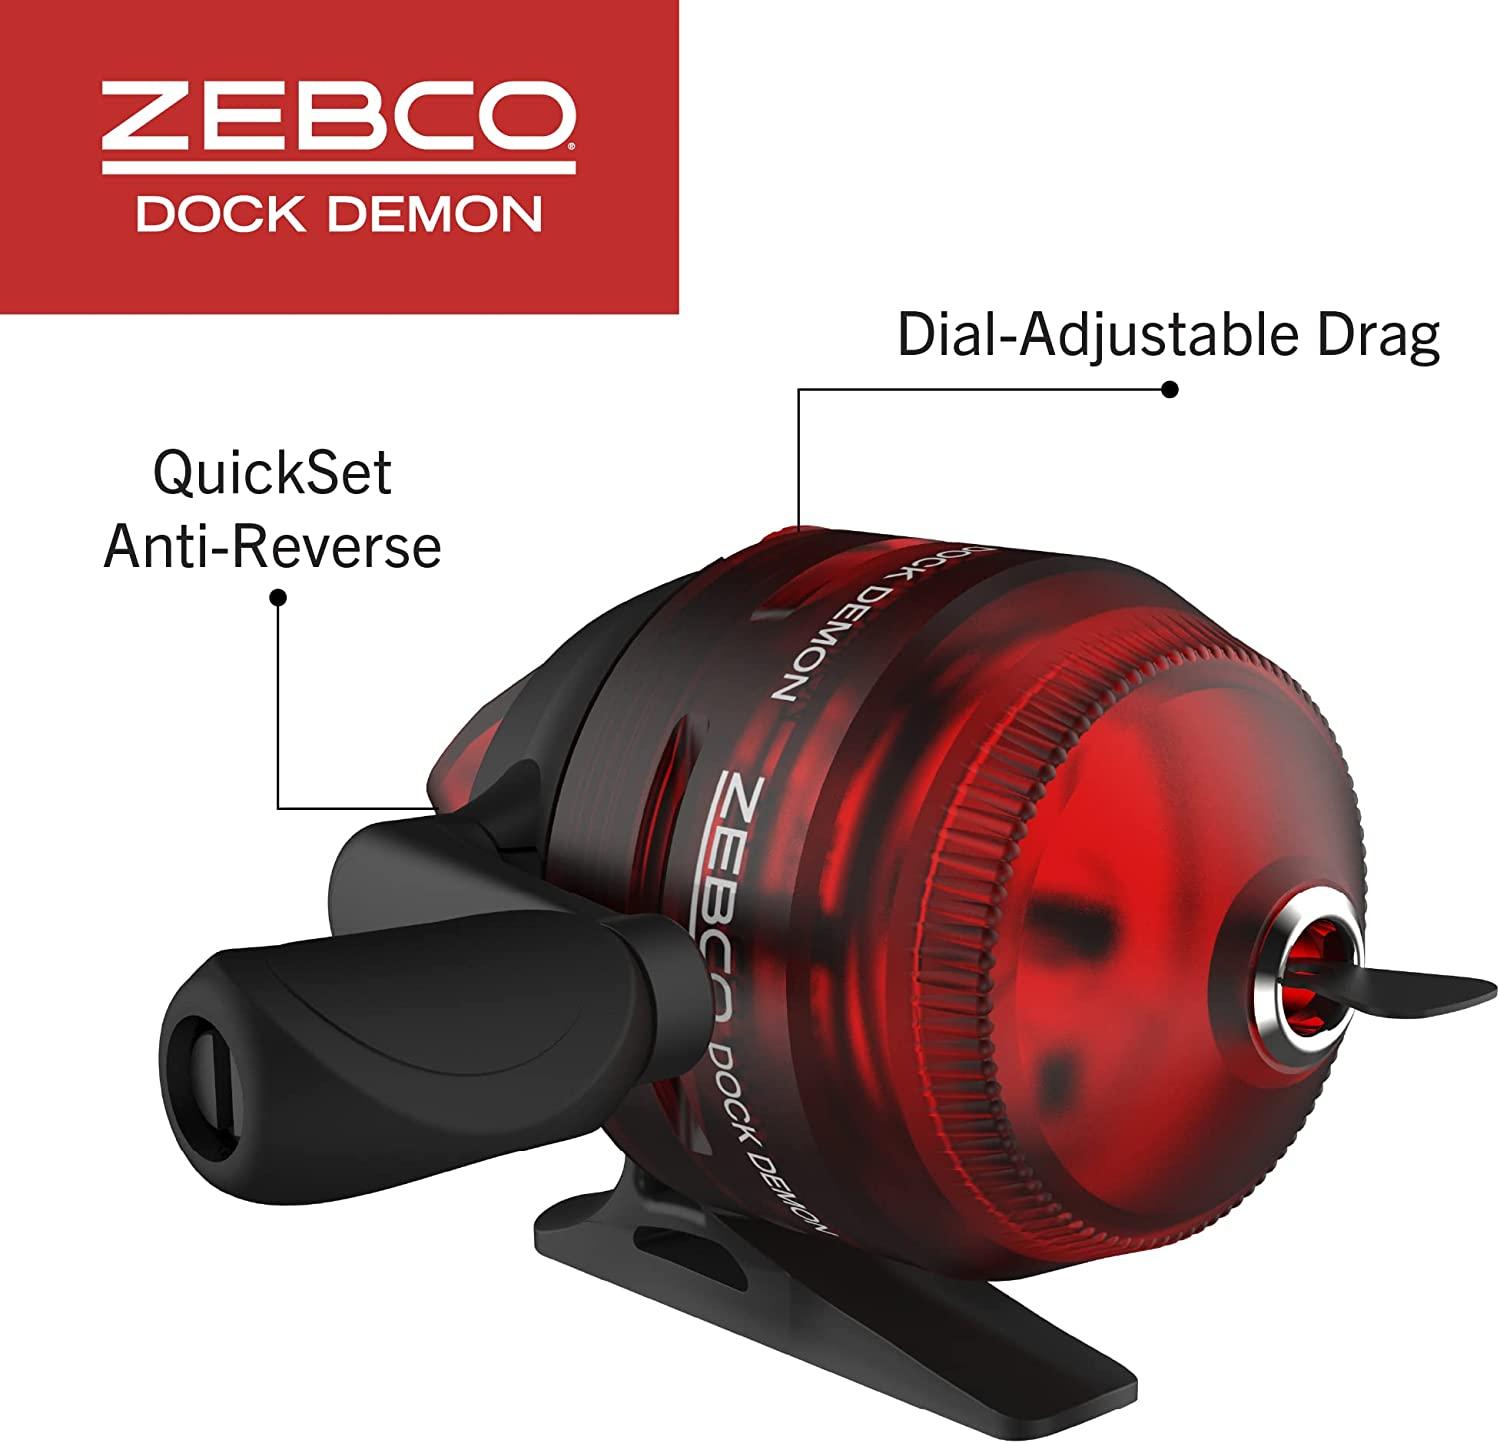 Zebco Dock Demon Spinning Reel or Spincast Reel and Fishing Rod Combo 30- Inch Durable Fiberglass Rod QuickSet Anti-Reverse Fishing Reel Spincast Reel  - Red